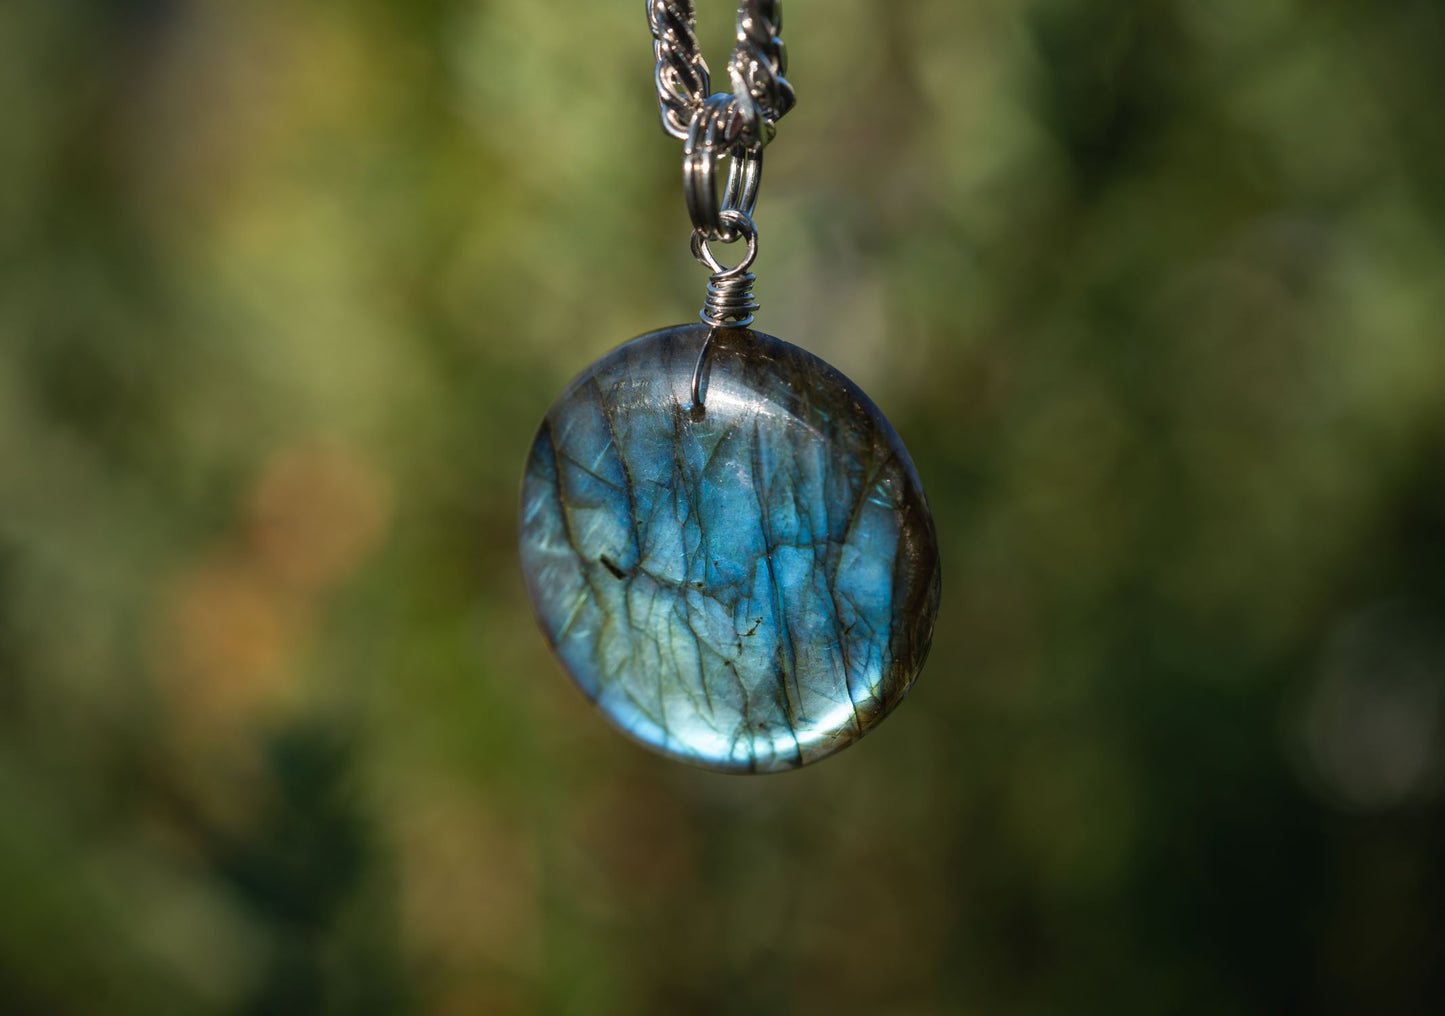 'Tune Into Your Greatness’ Giant Labradorite Medallion Stainless Steel Chonk Necklace